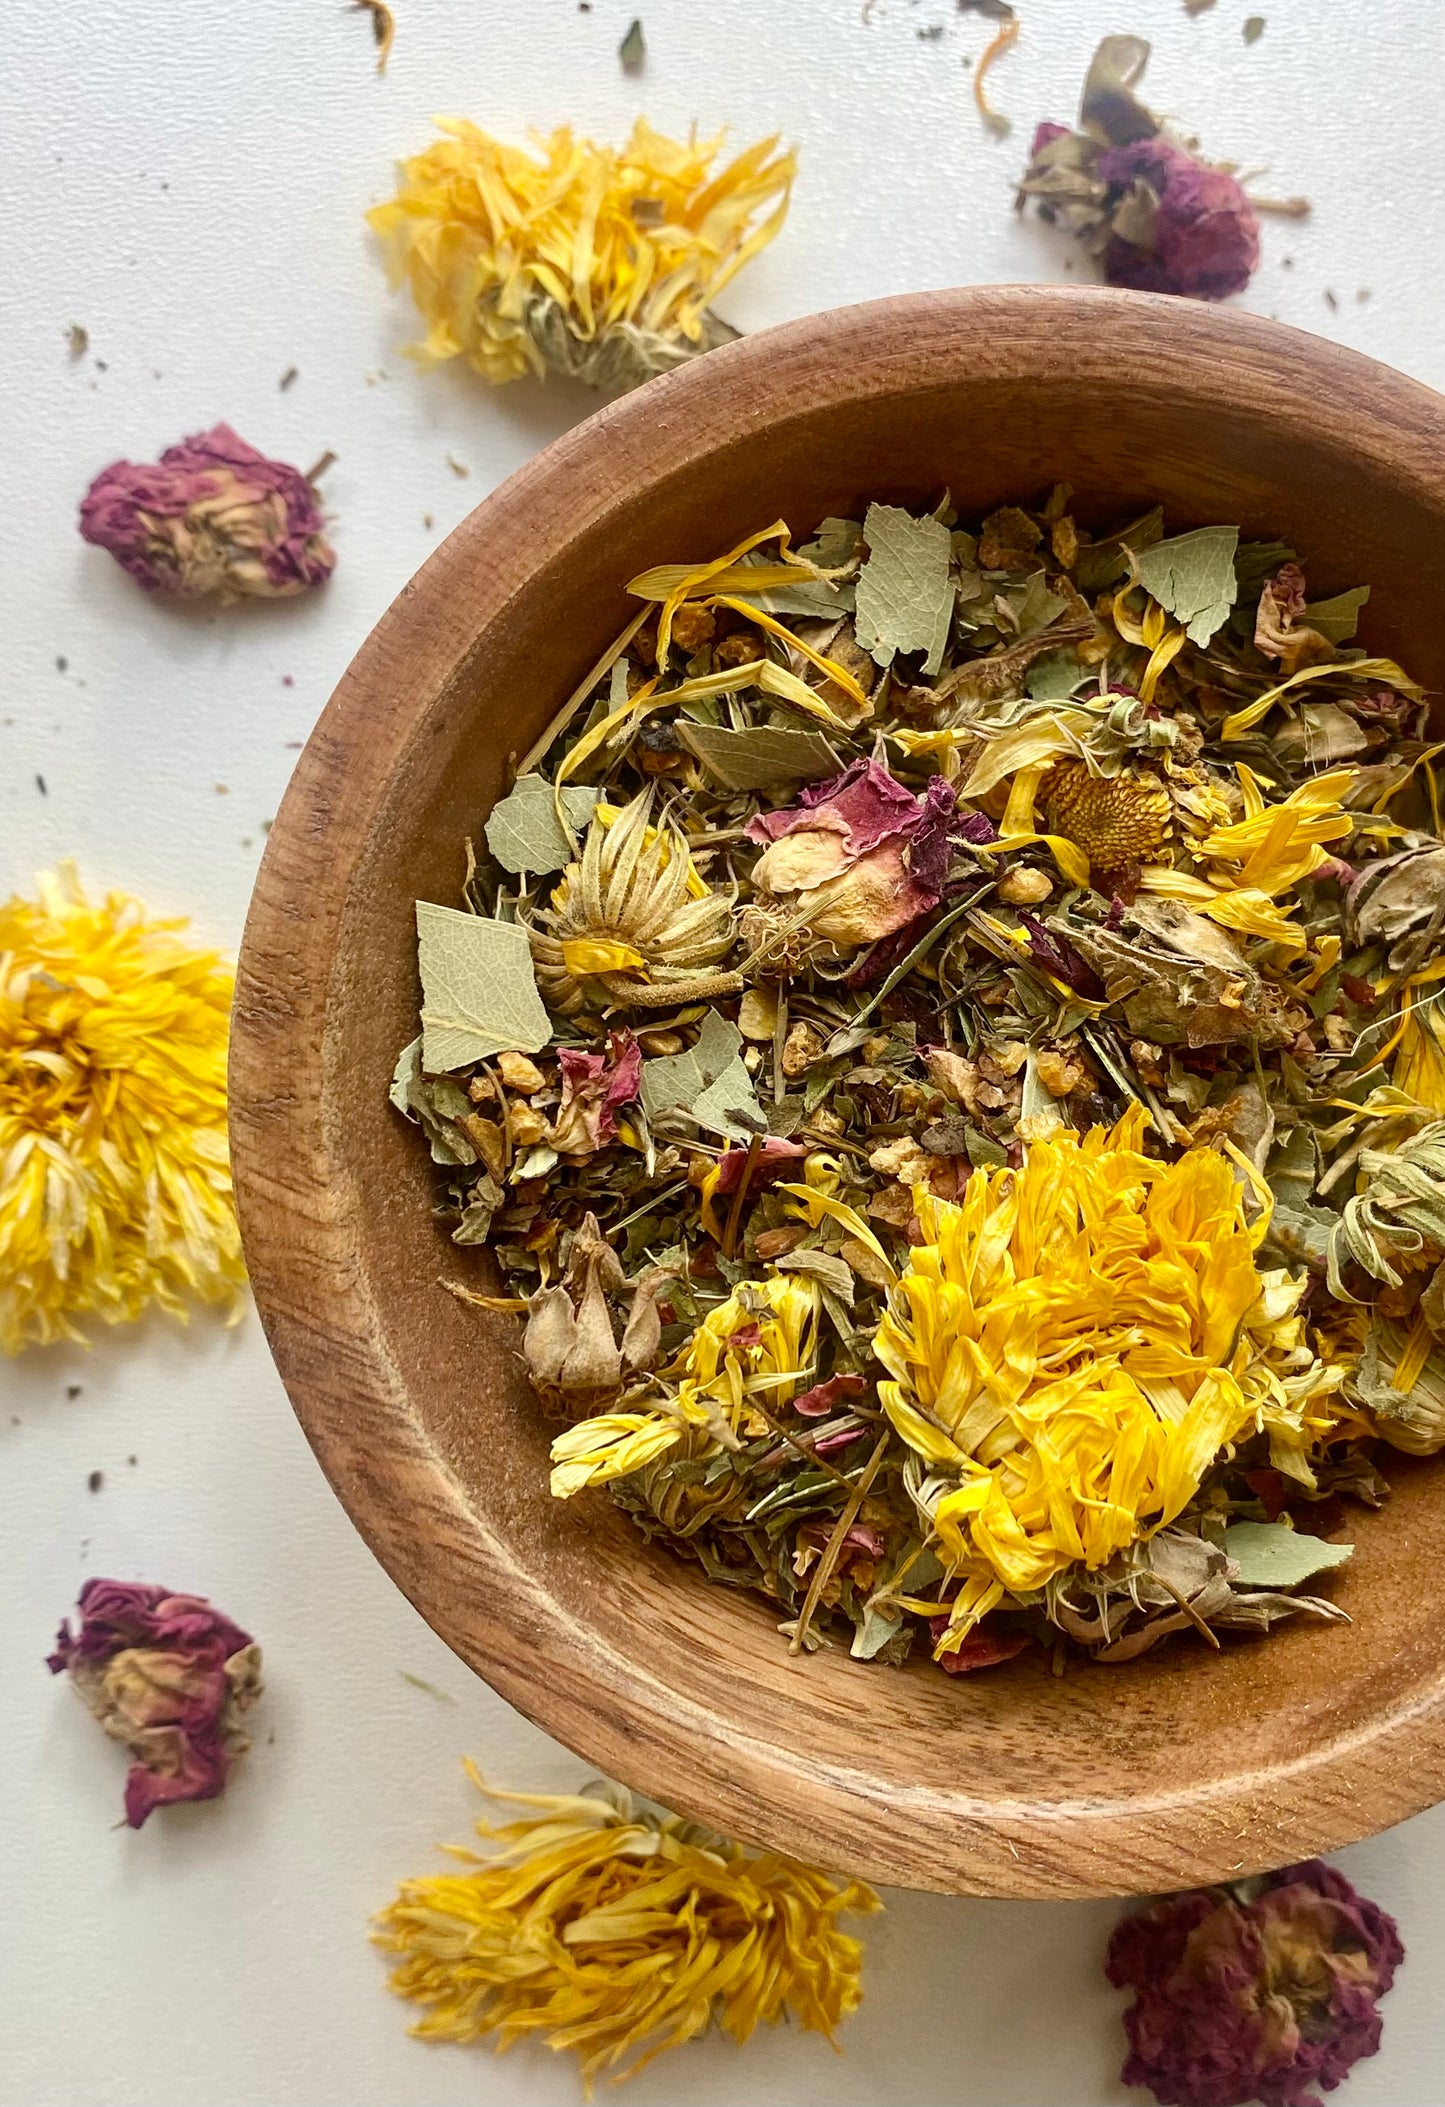 Radiant: Herbal Tea for Your Skin